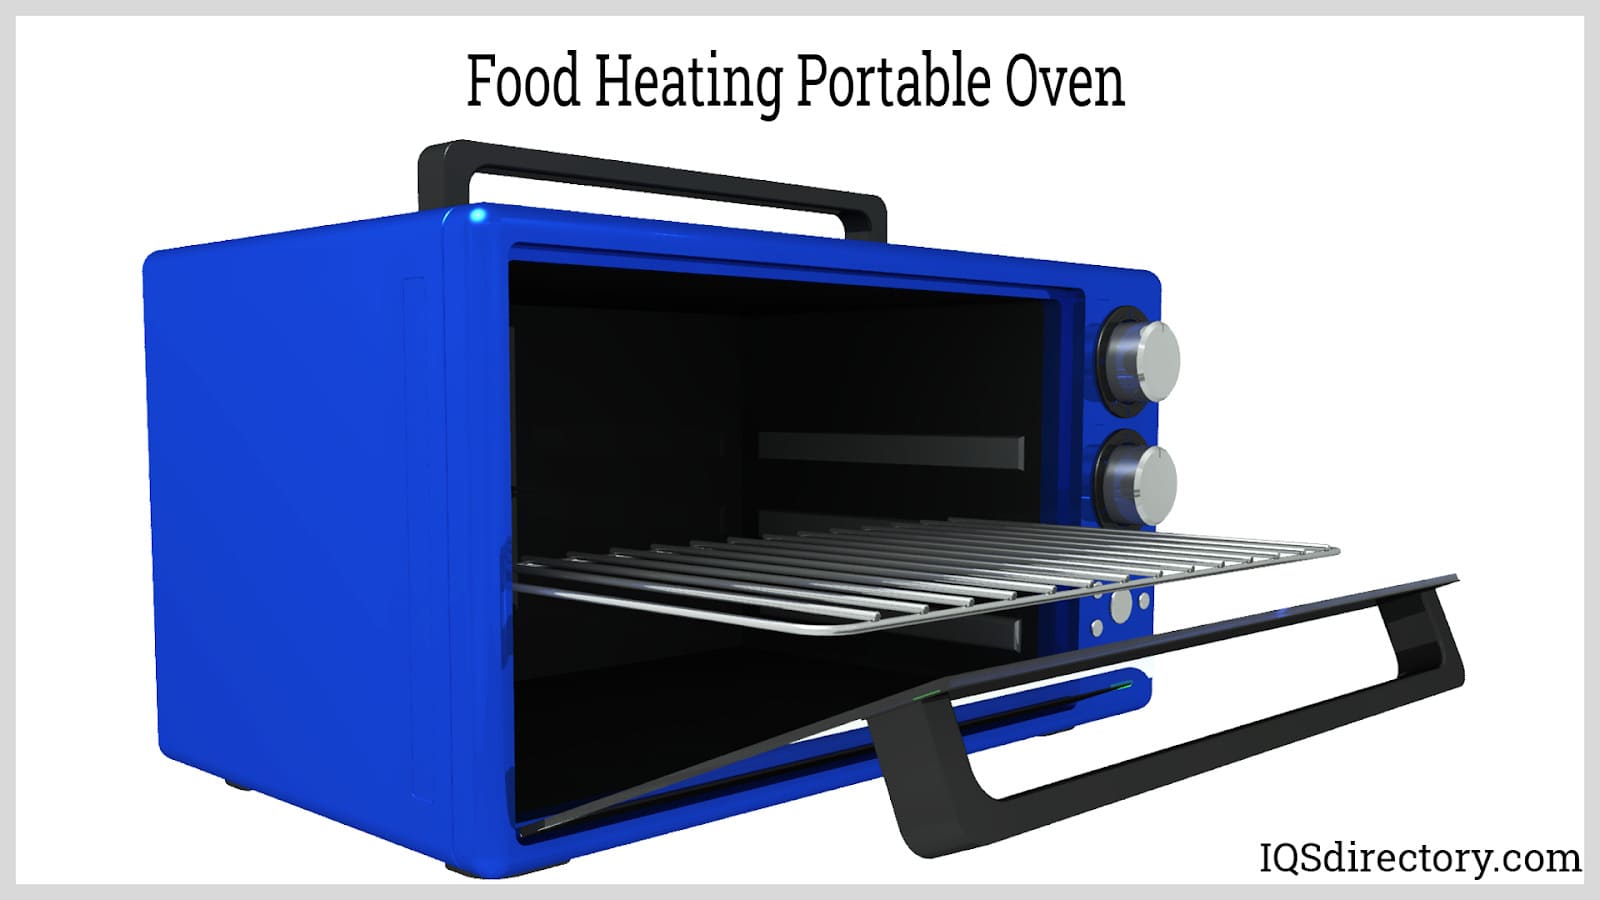 Food Heating Portable Oven